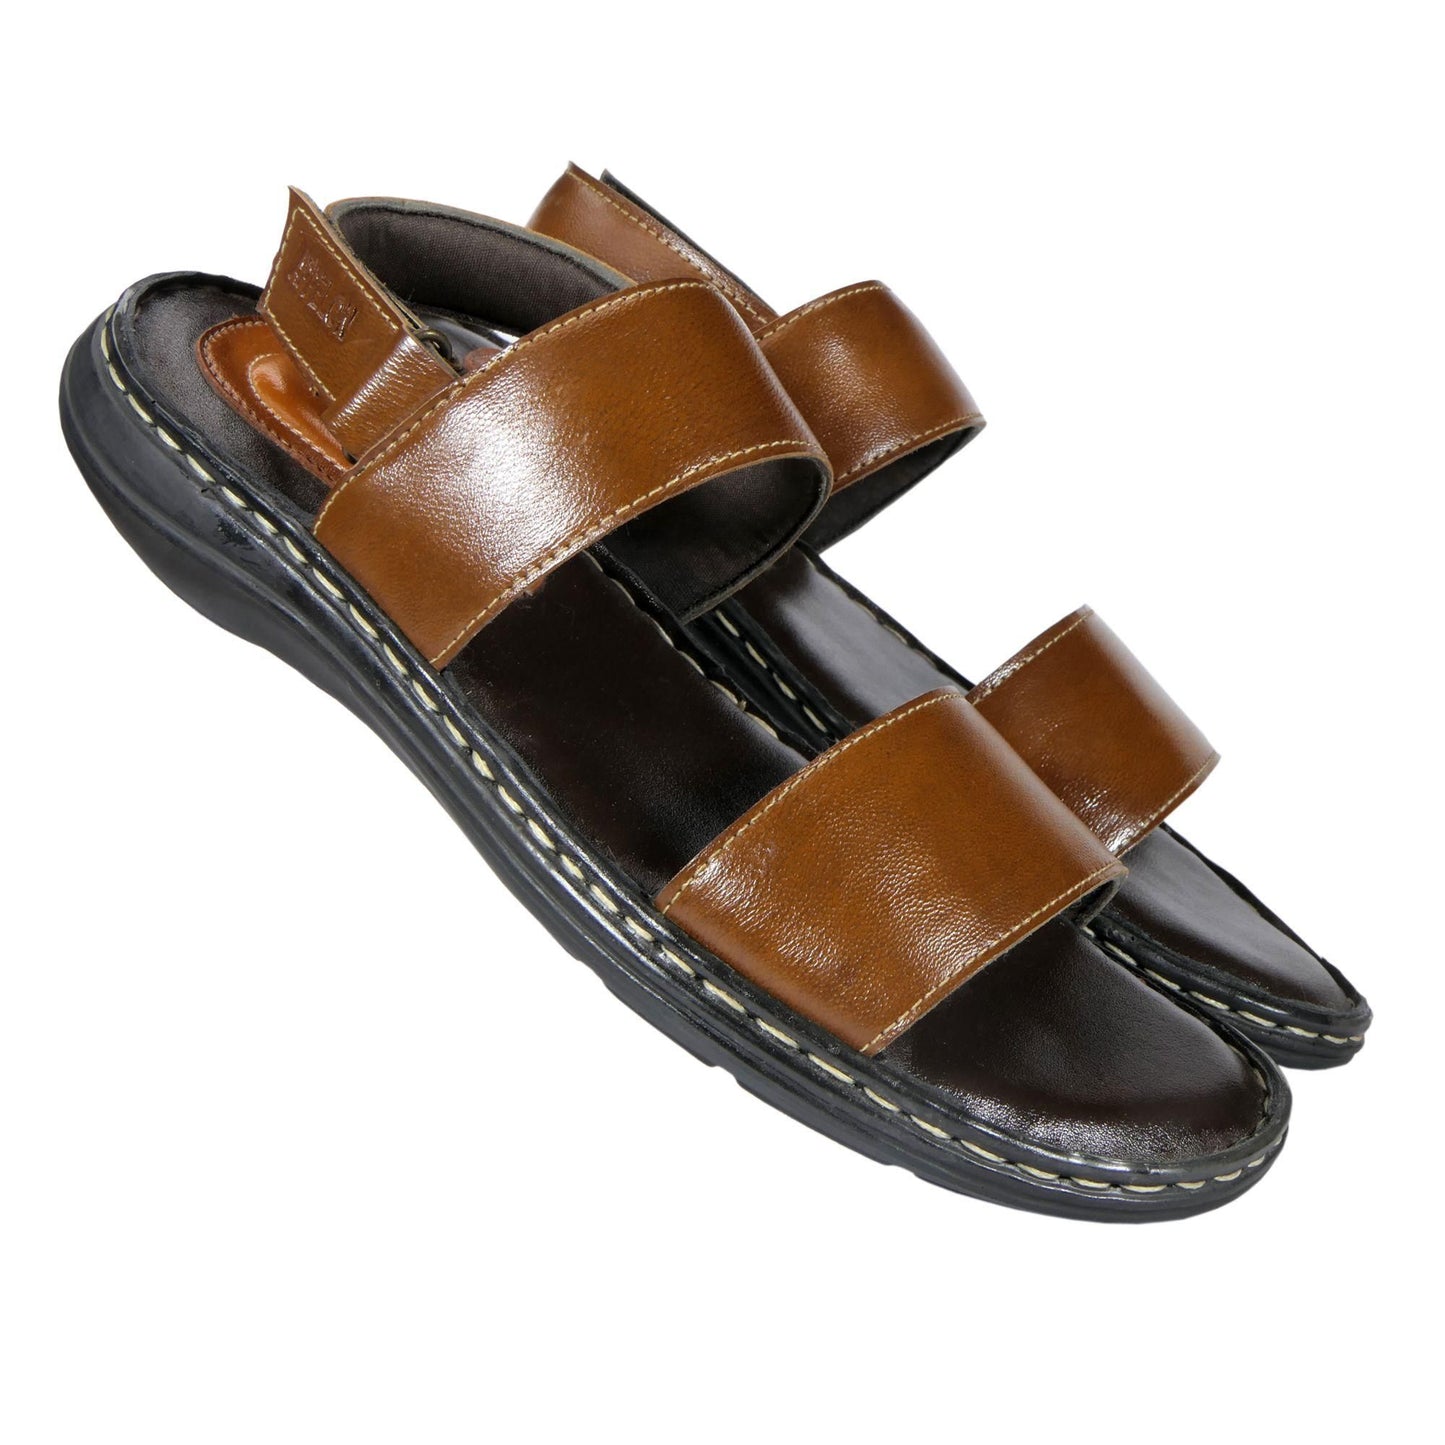 AM PM Men's Daily wear Leather Sandals